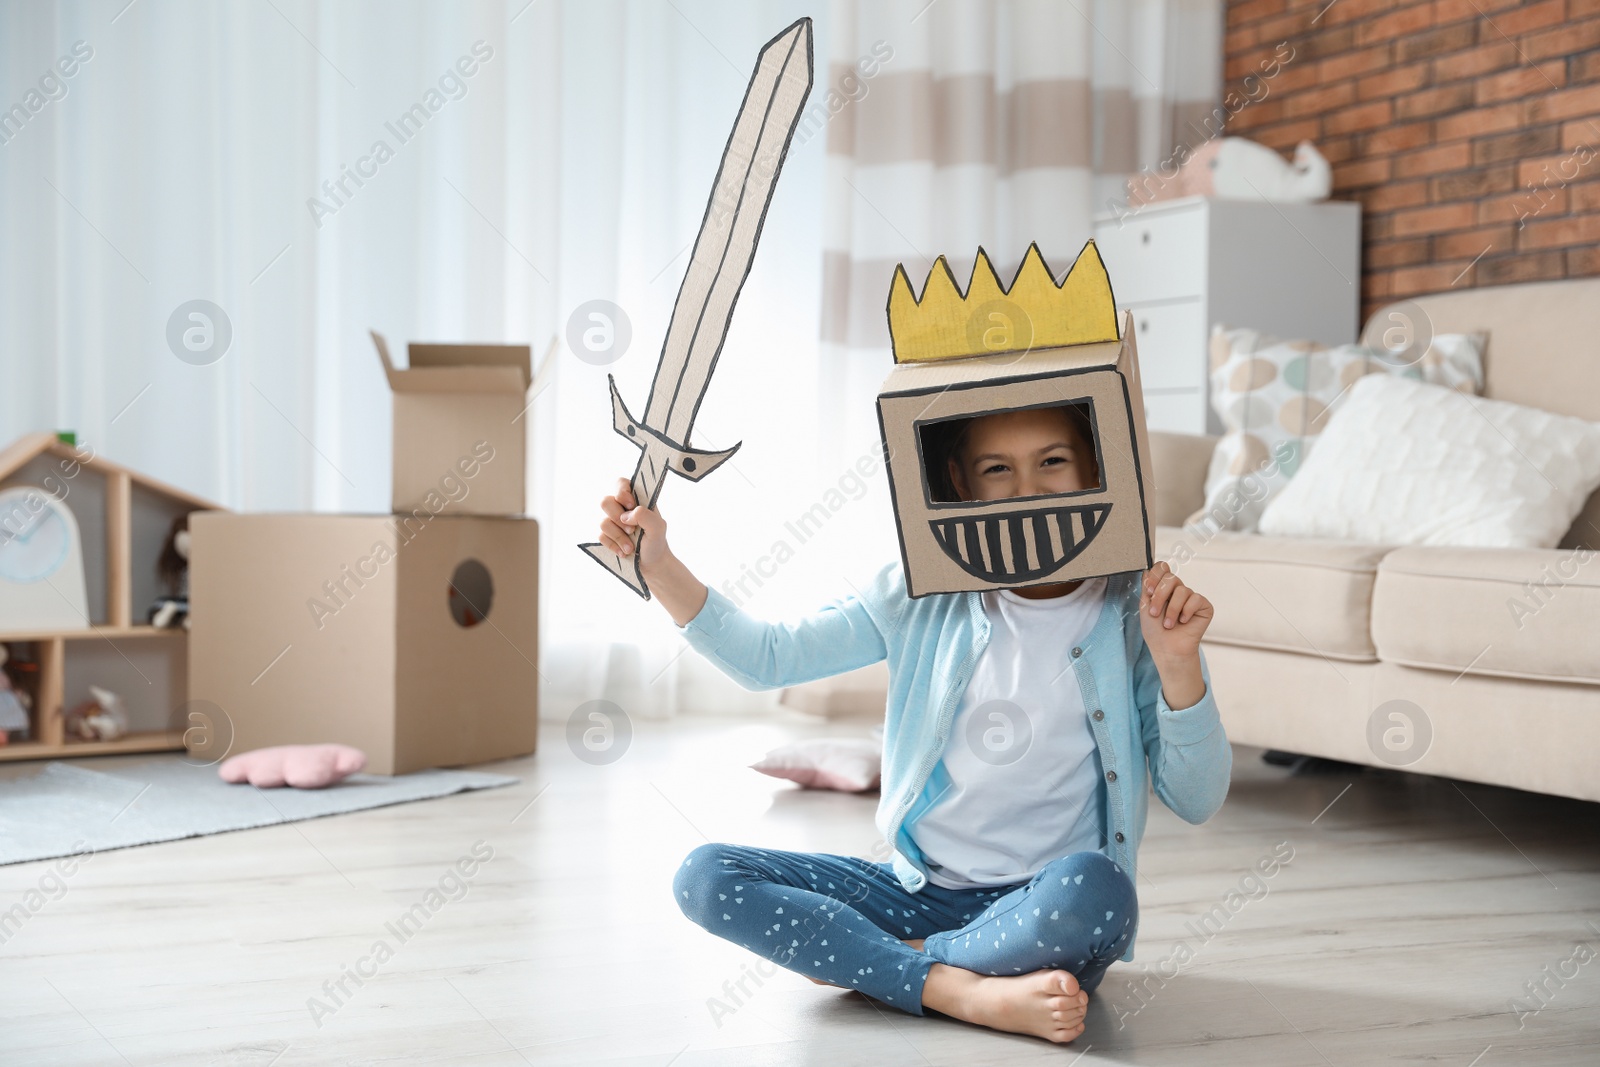 Photo of Cute little girl playing with cardboard armor in living room